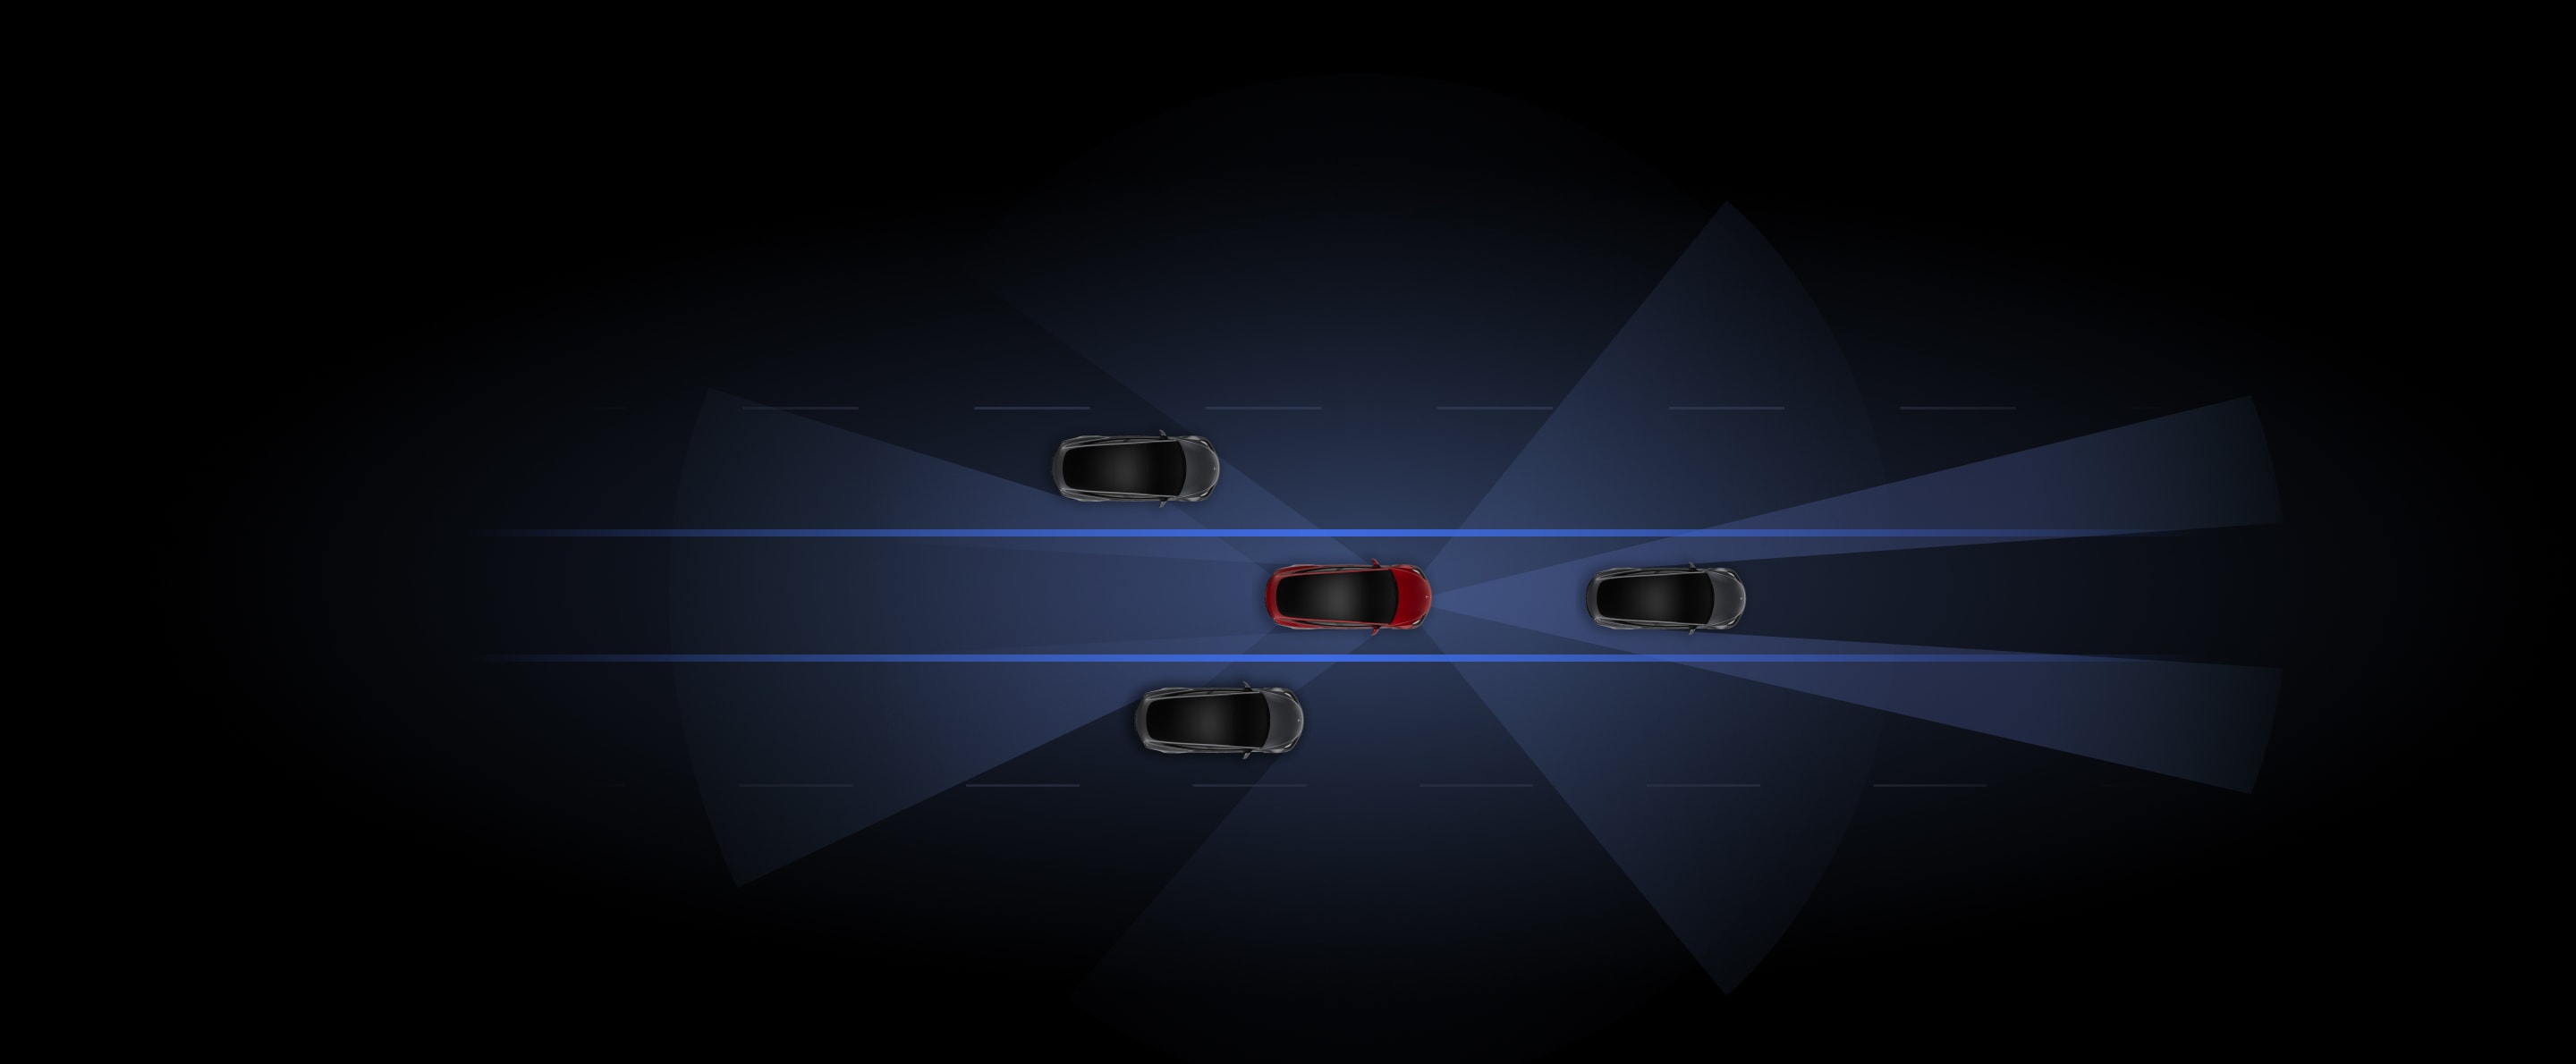 Rendered visualization of gray and red Tesla vehicles using Autopilot features. 